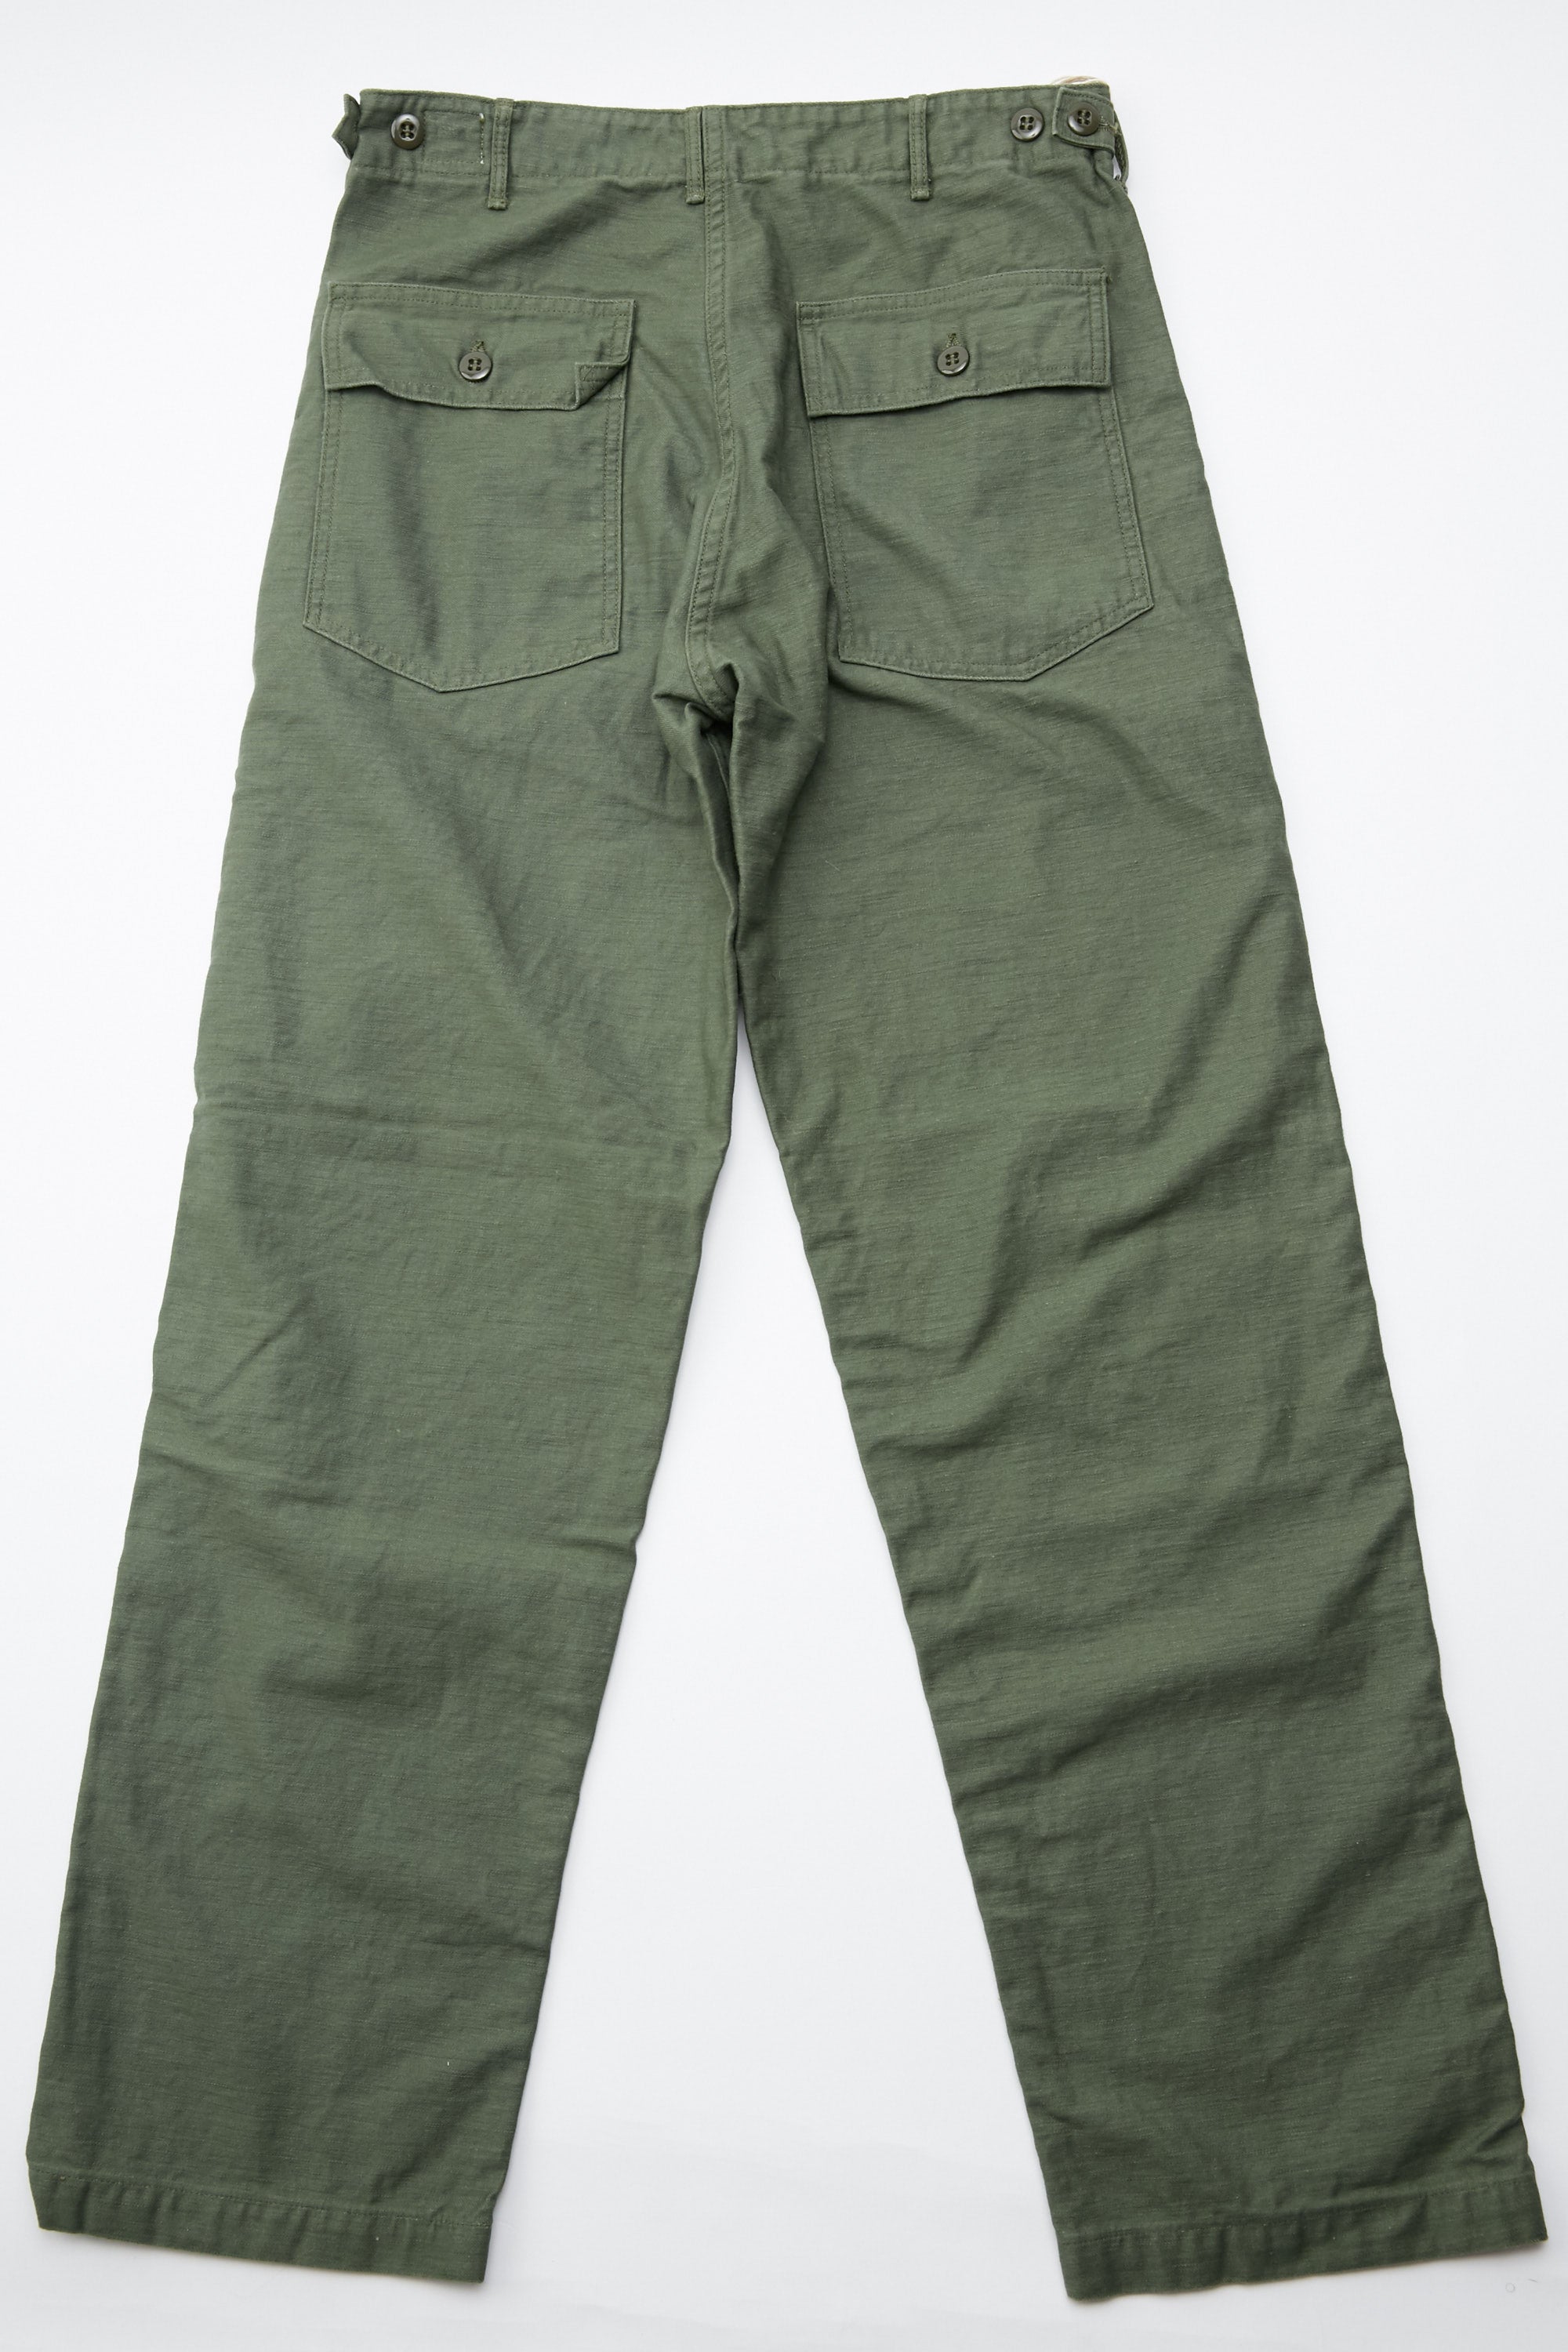 OrSlow US Army Fatigue Pants (Regular Fit) - Green Reverse Cotton Sate ...